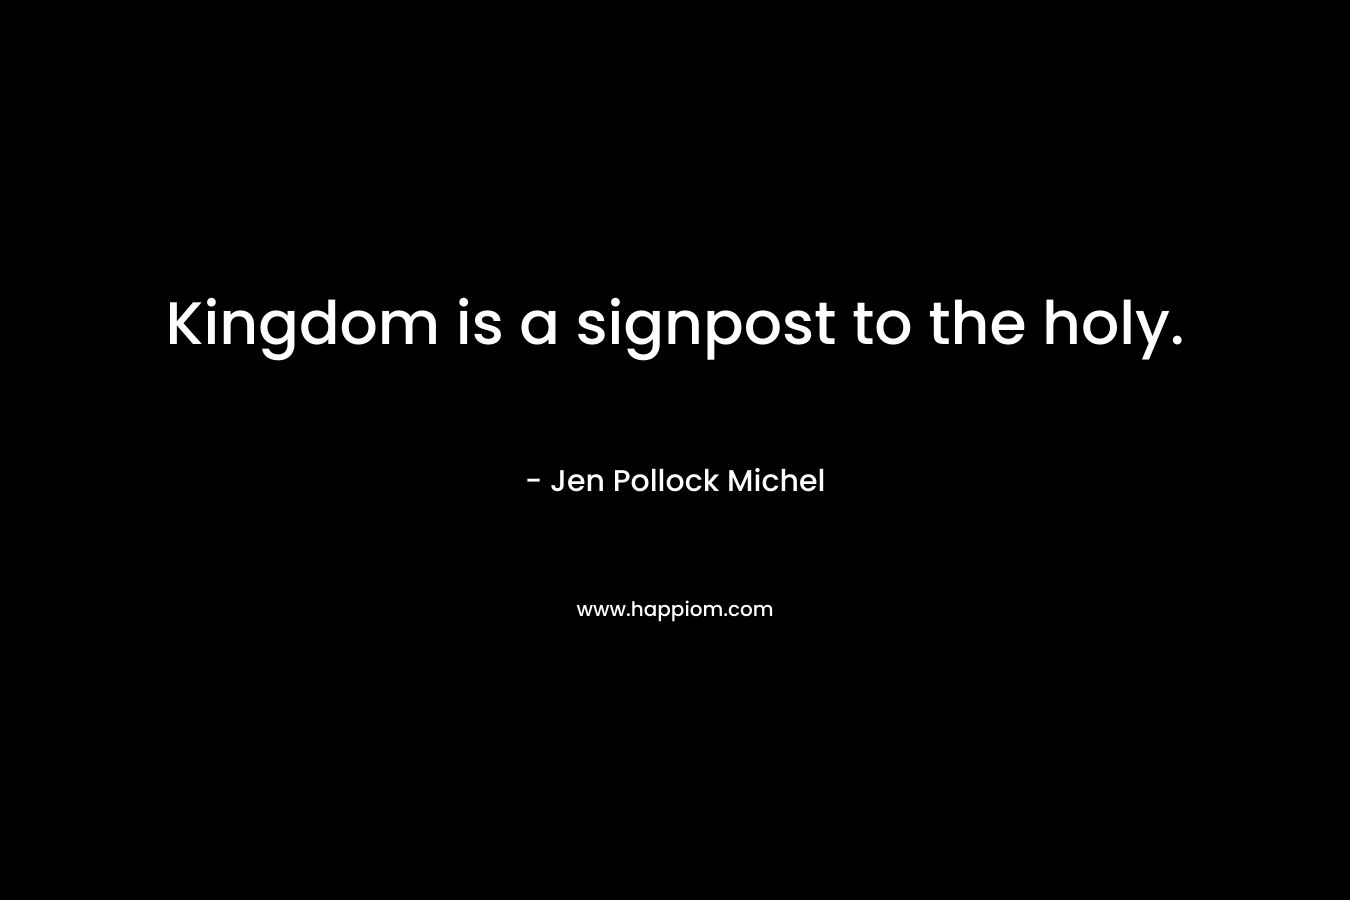 Kingdom is a signpost to the holy. – Jen Pollock Michel